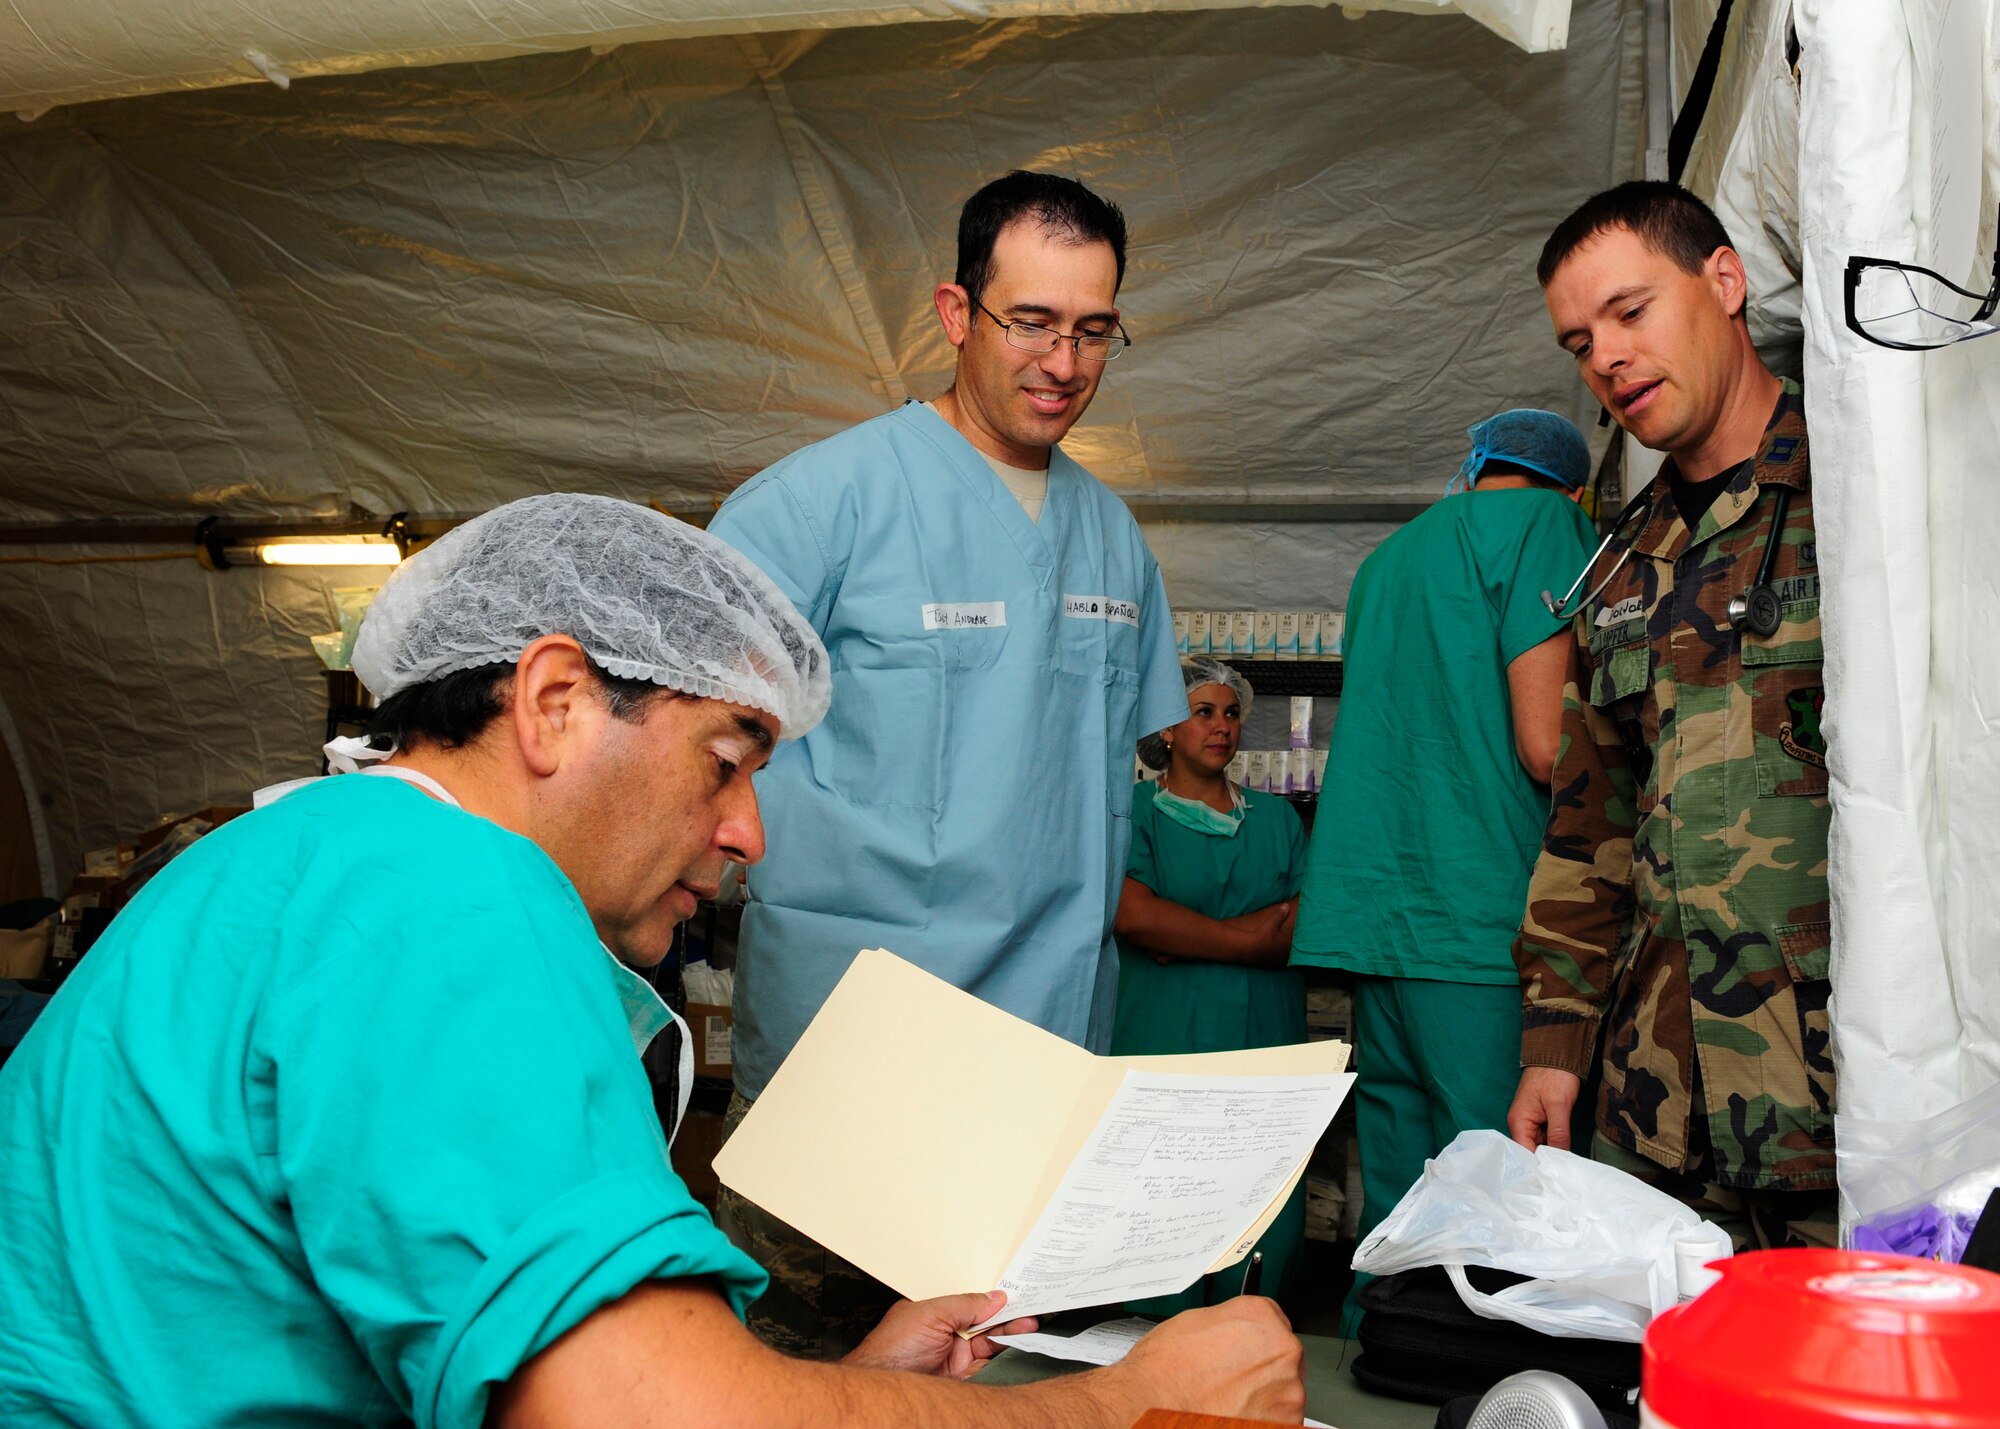 Tech. Sgt. Antonio Andrade (center) translates for a Chilean doctor (left) and Capt. Brian Lupfer (right) after a surgery in the expeditionary hospital March 16, 2010, in Angol, Chile. Sergeant Andrade is a translator for the Air Force Expeditionary Medical Support team here. He is a dental technician assigned to 336th Dental Squadron at Mountain Home Air Force Base, Idaho. Captain Lupfer is a physician's assistant assigned to the 359th Medical Group at Randolph Air Force Base, Texas. (U.S. Air Force photo/Senior Airman Tiffany Trojca)